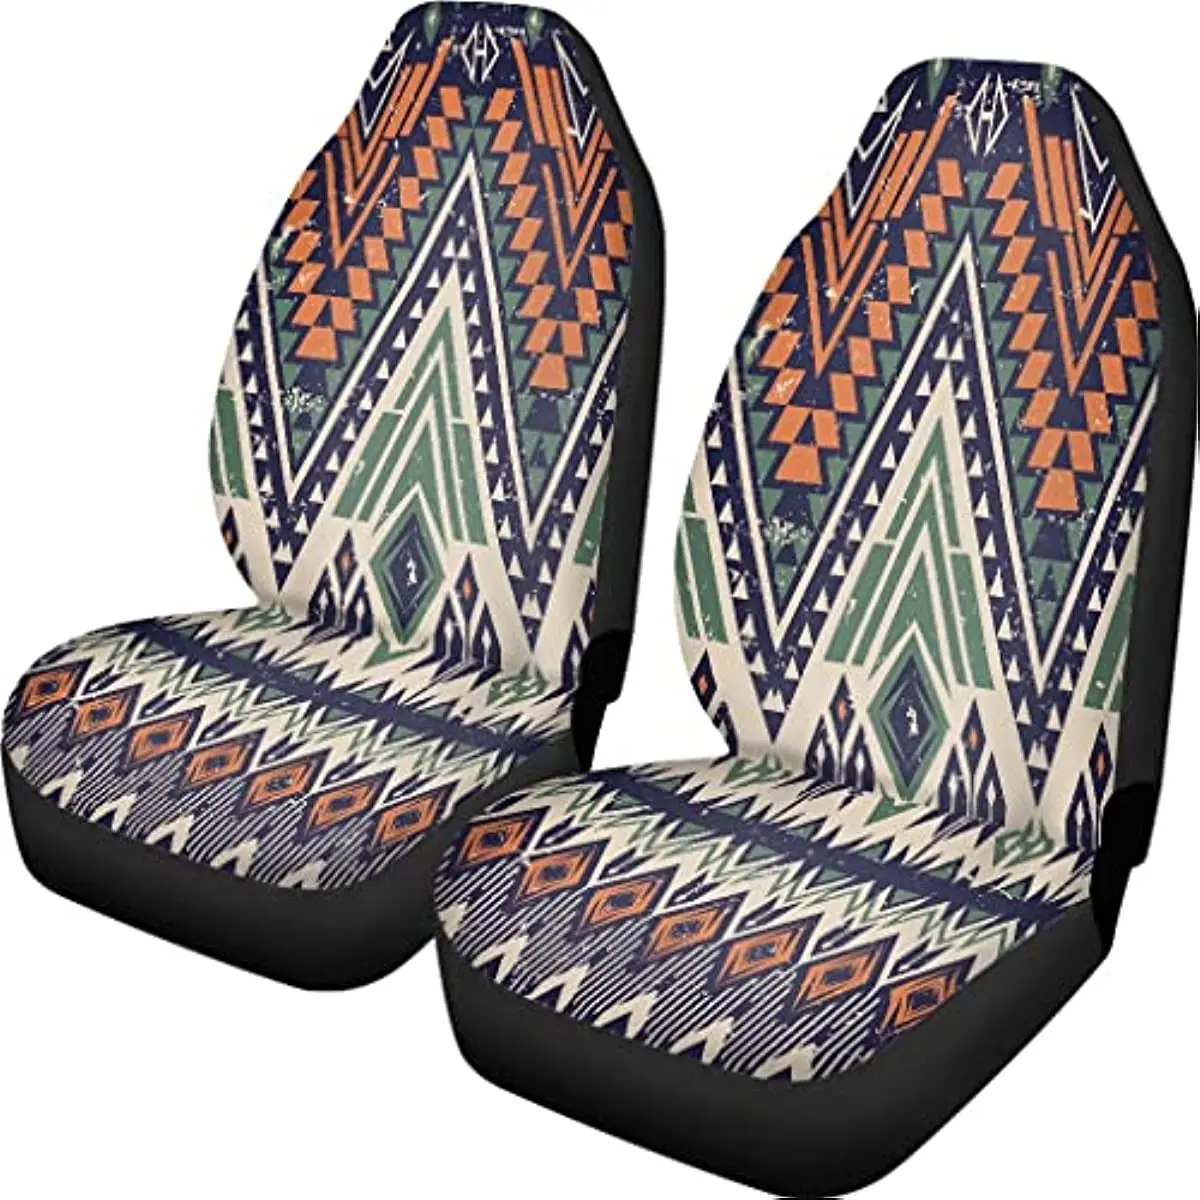 

Pehede Car Seat Protector Tribal Element Vintage Seamless Pattern Front Seat Cover for Car SUV Truck,Interior Covers 2 Pcs